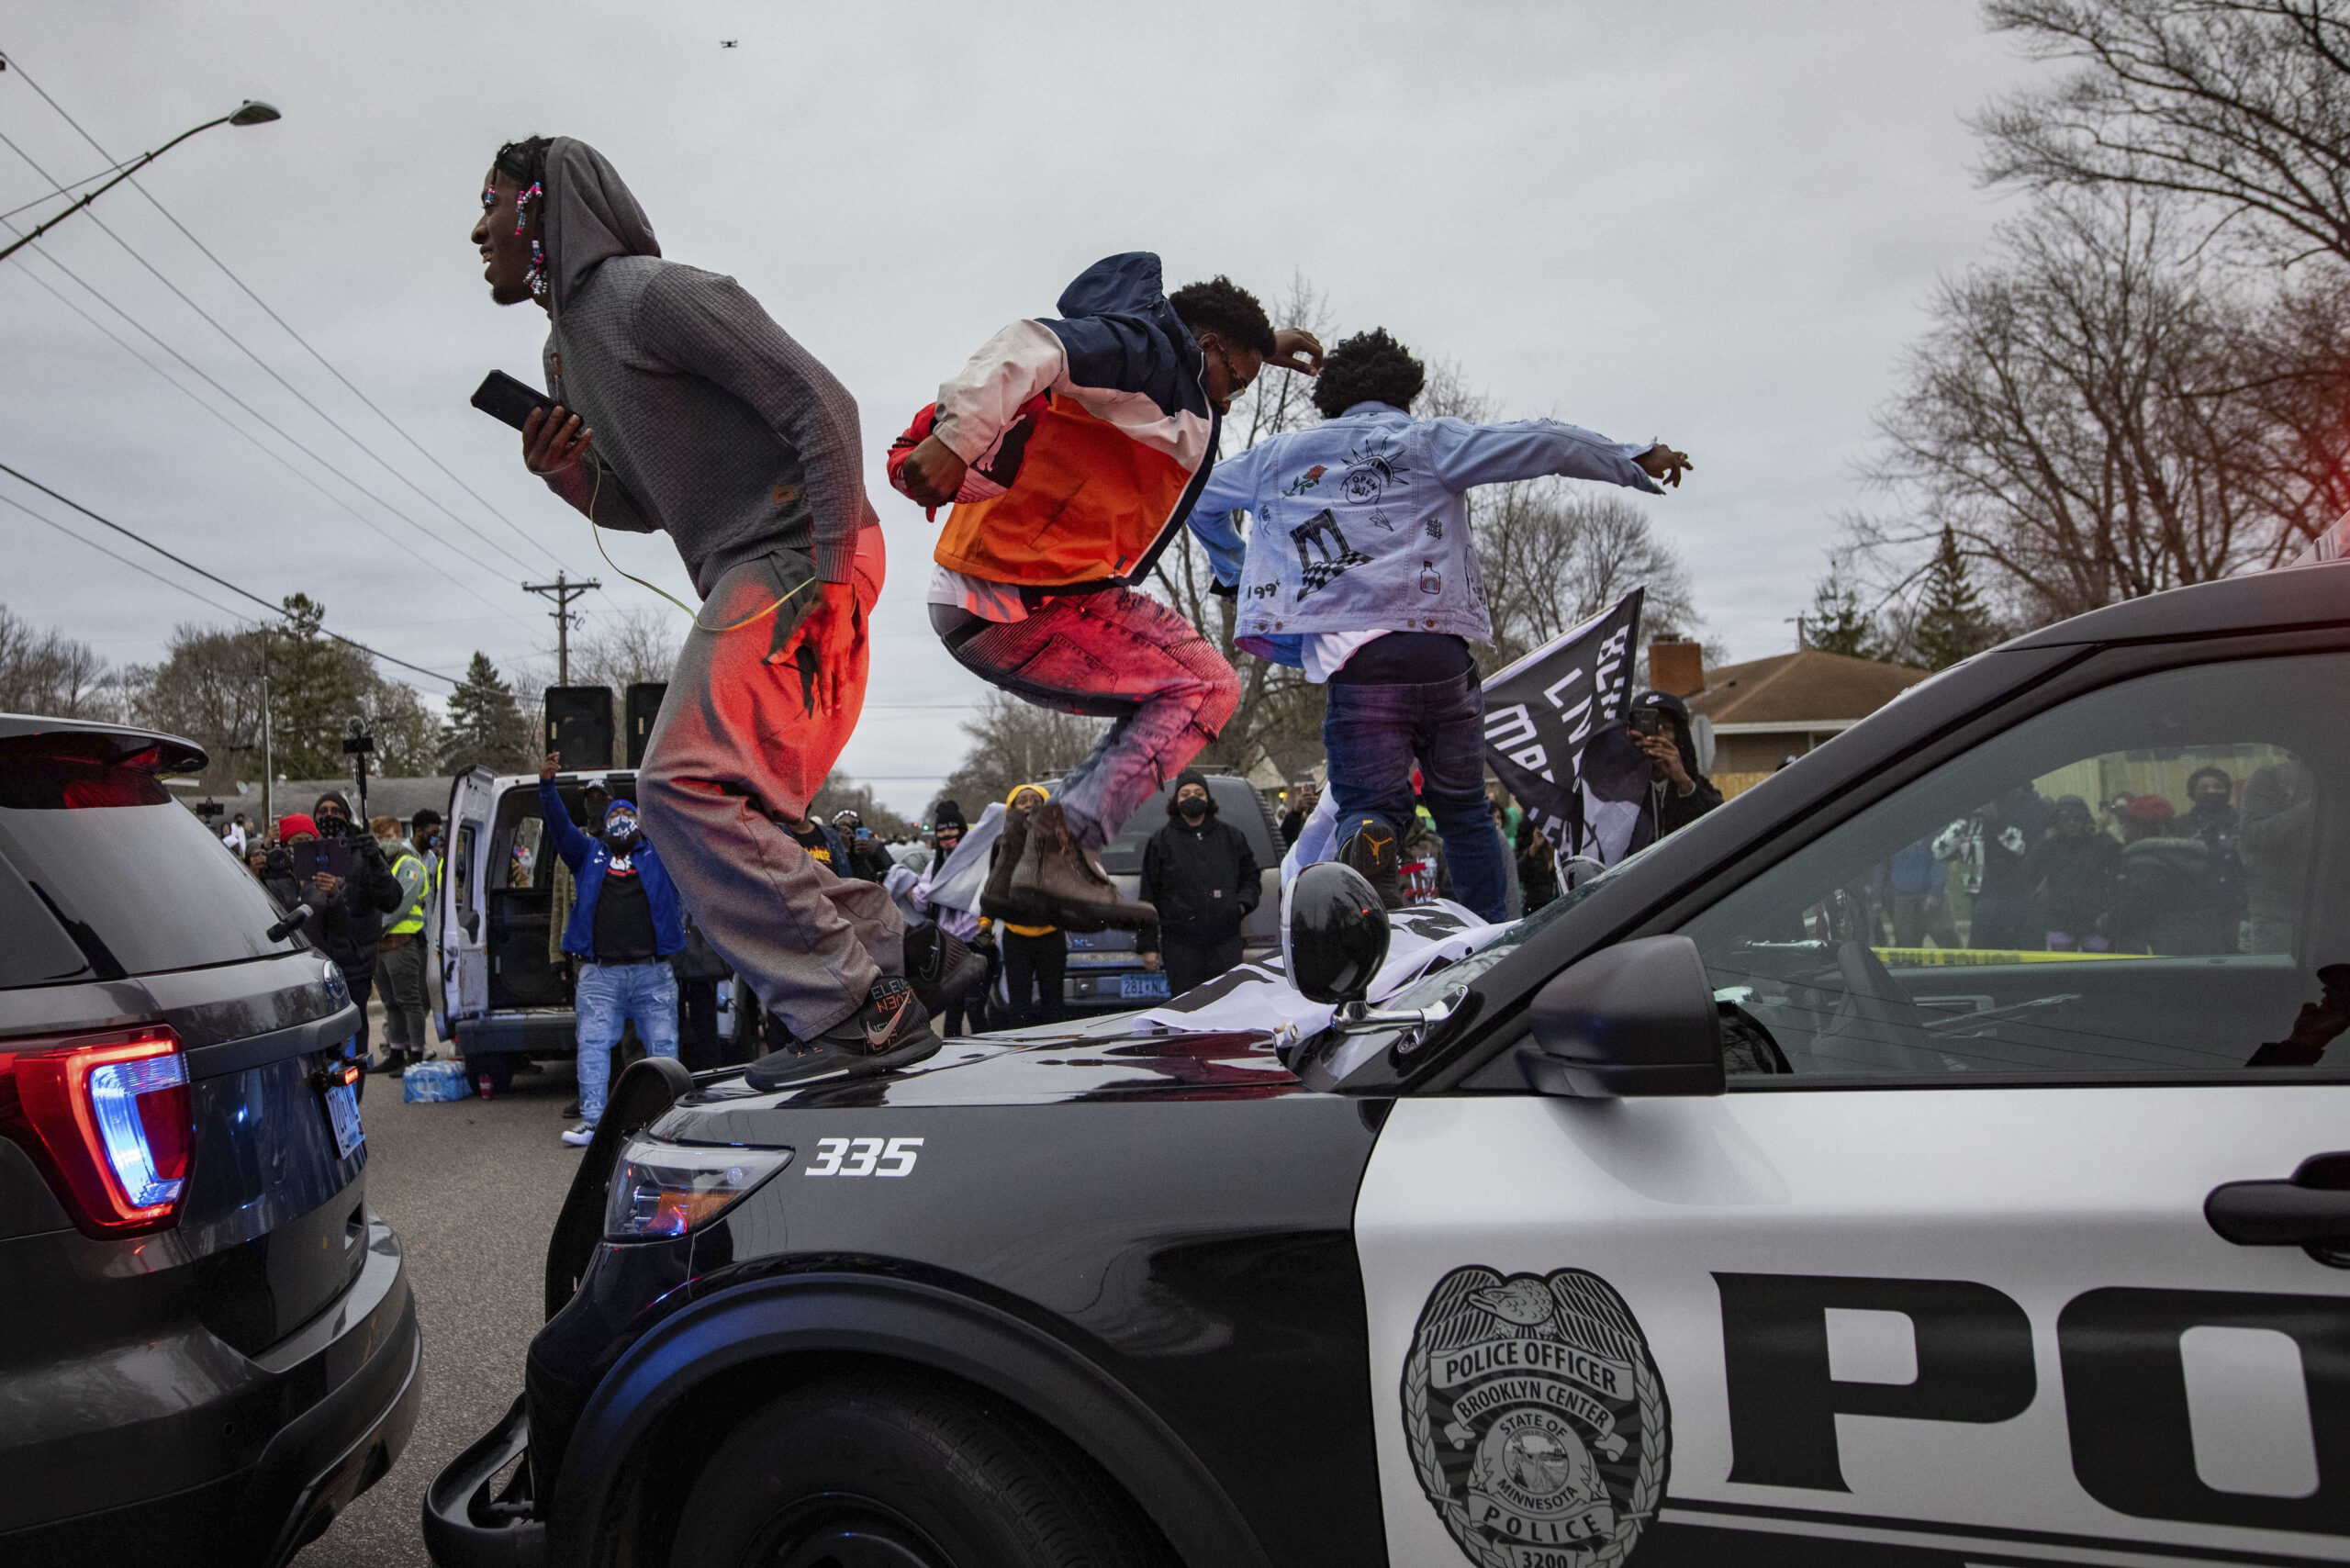 Men jump on the hood of a police car after a family said a man was shot and killed by law enforcement on Sunday, April 11, 2021, in Brooklyn Center, Minn. (AP Photo/Christian Monterrosa)